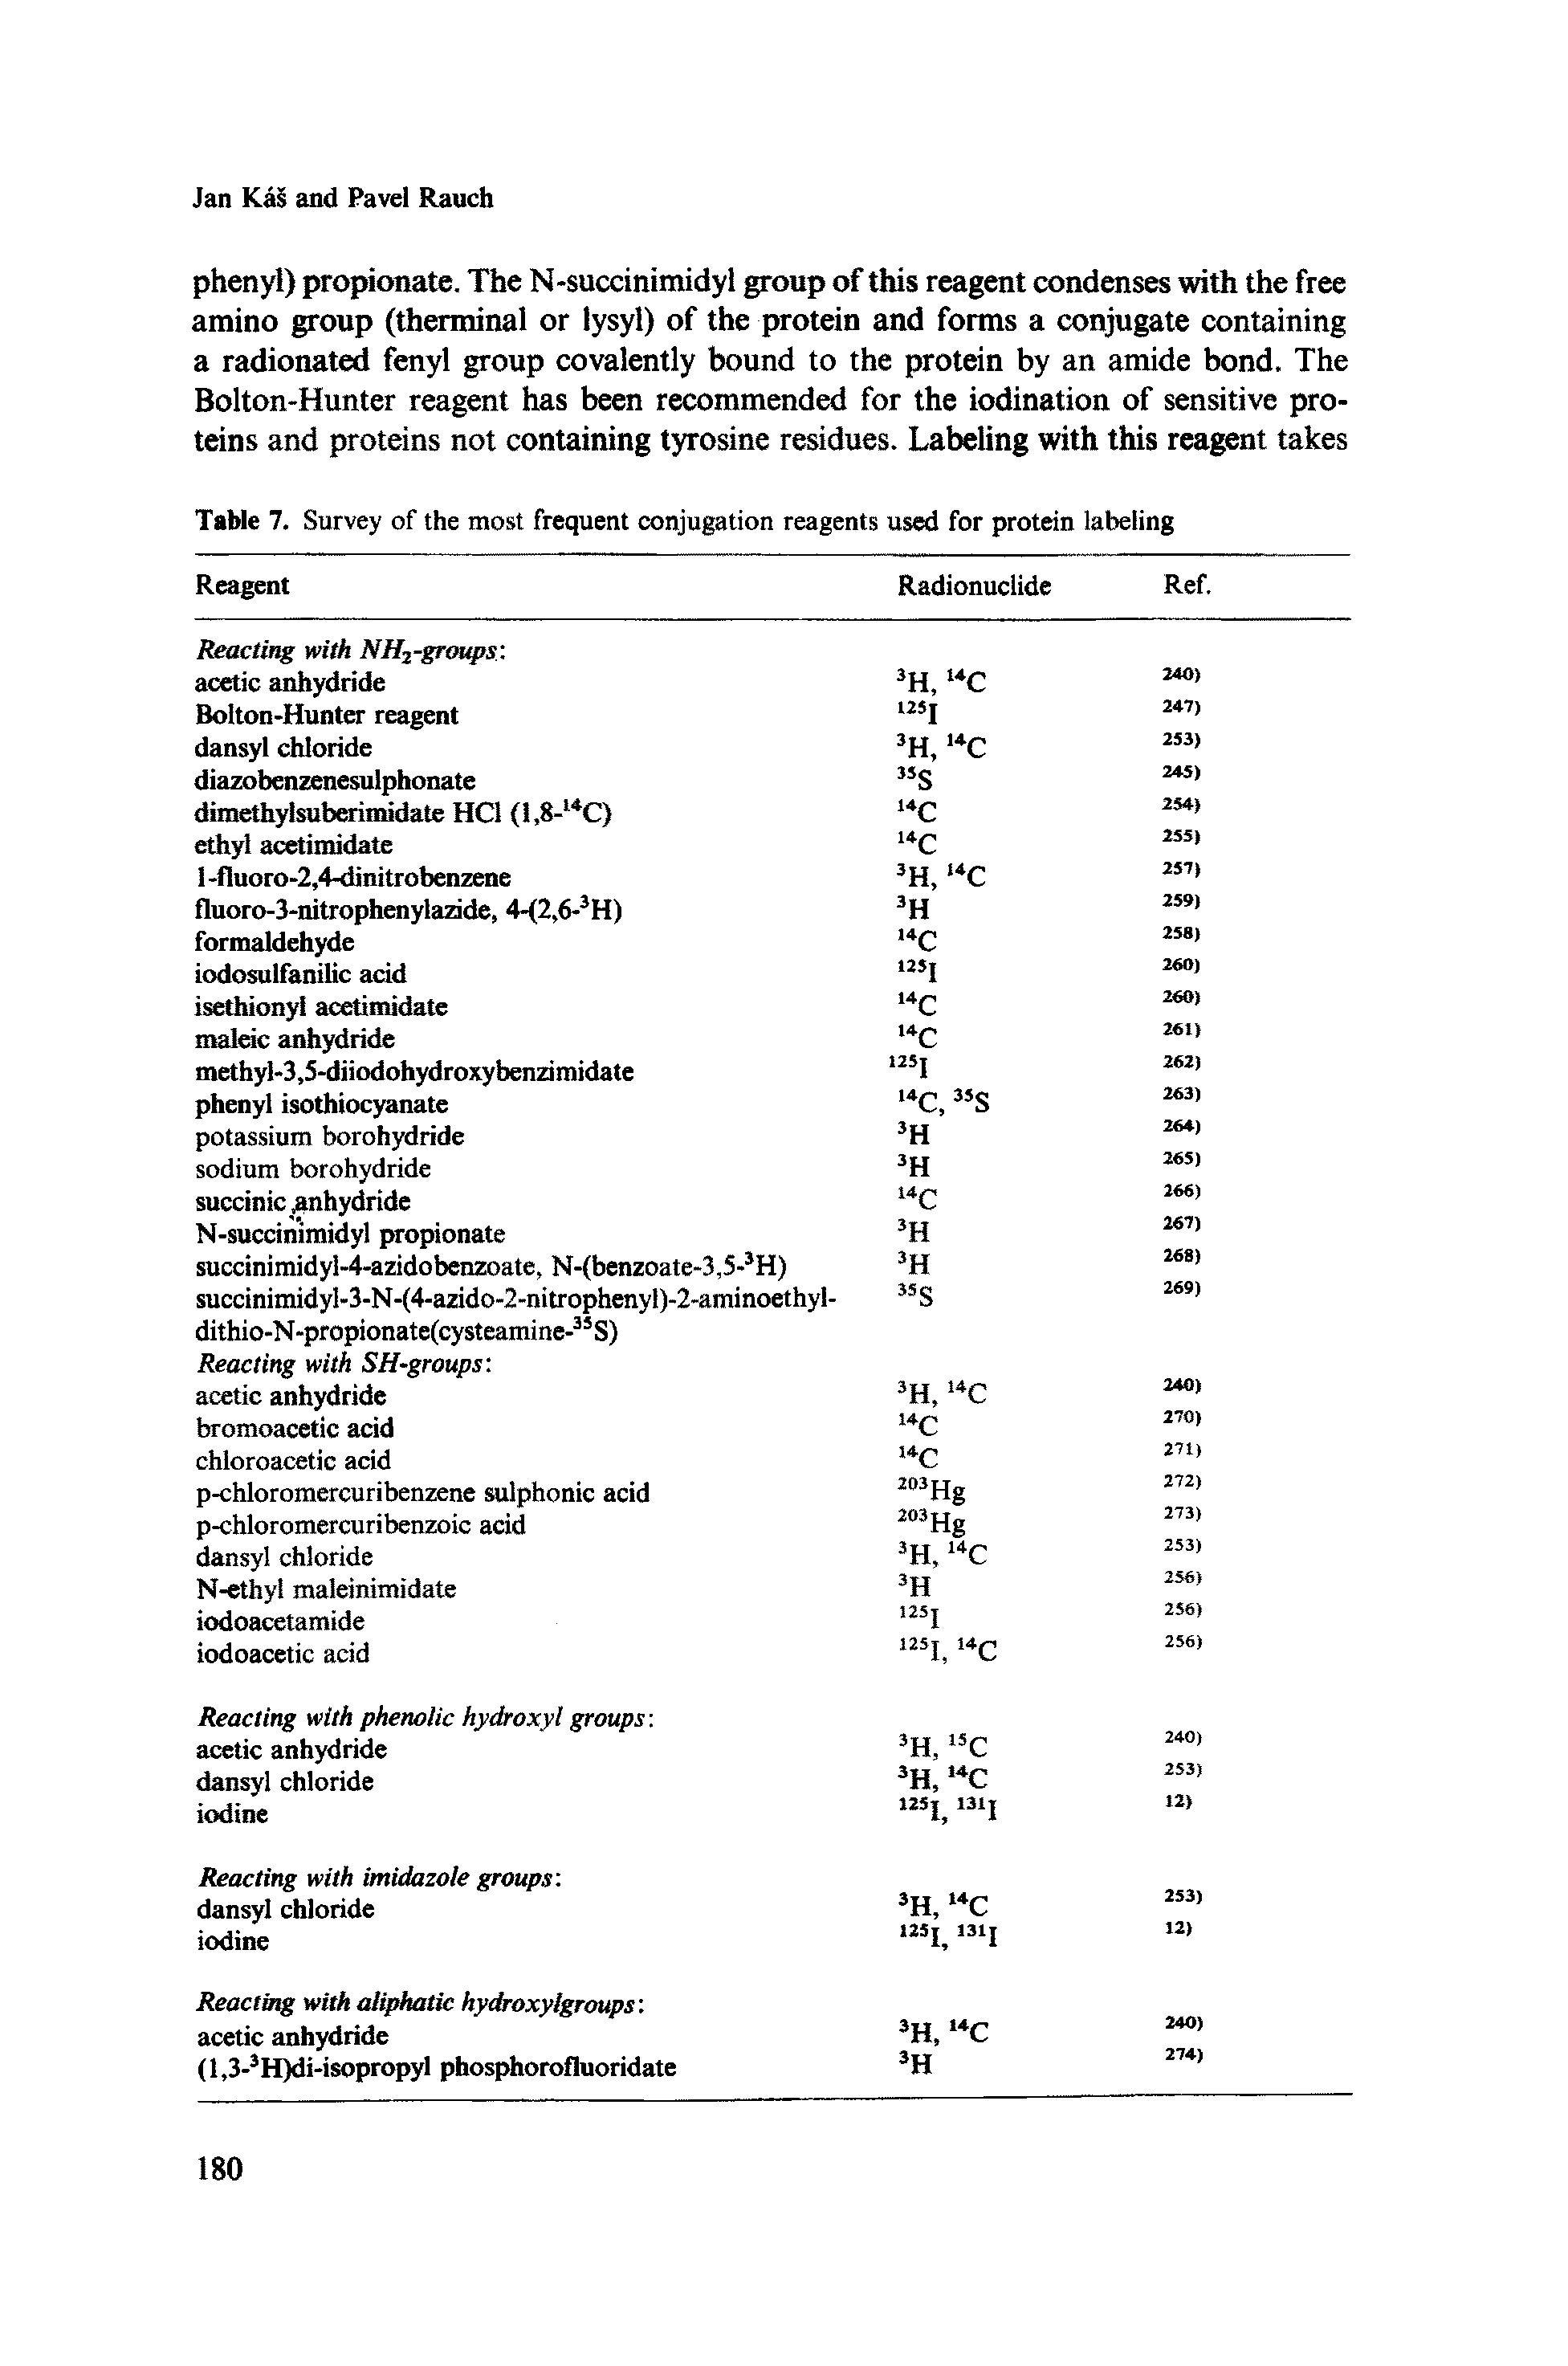 Table 7. Survey of the most frequent conjugation reagents used for protein labeling...